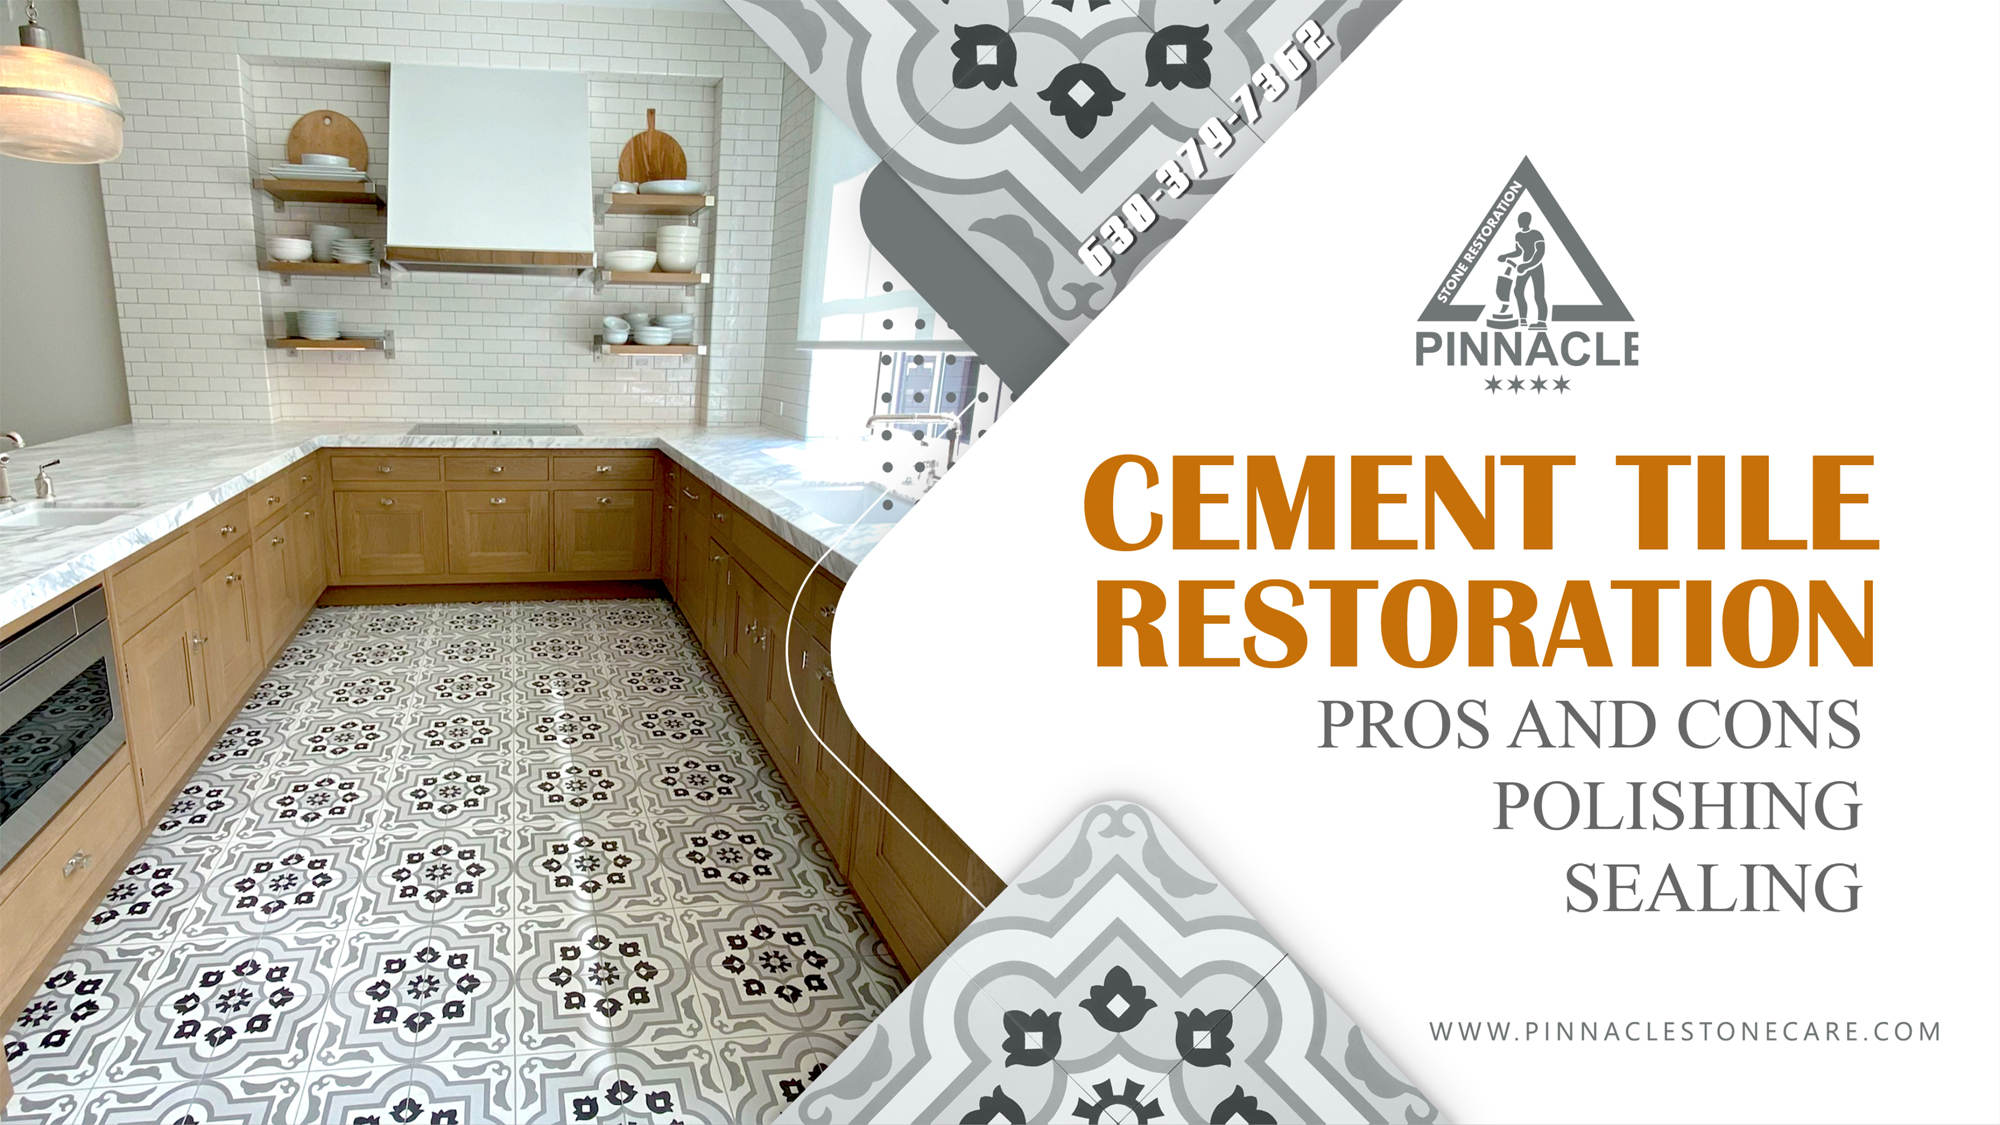 Cement tile restoration aka concrete tile (encaustic), honing, stain removal grout cleaning, sealing. Pros and Cons. Cement tile maintenance.